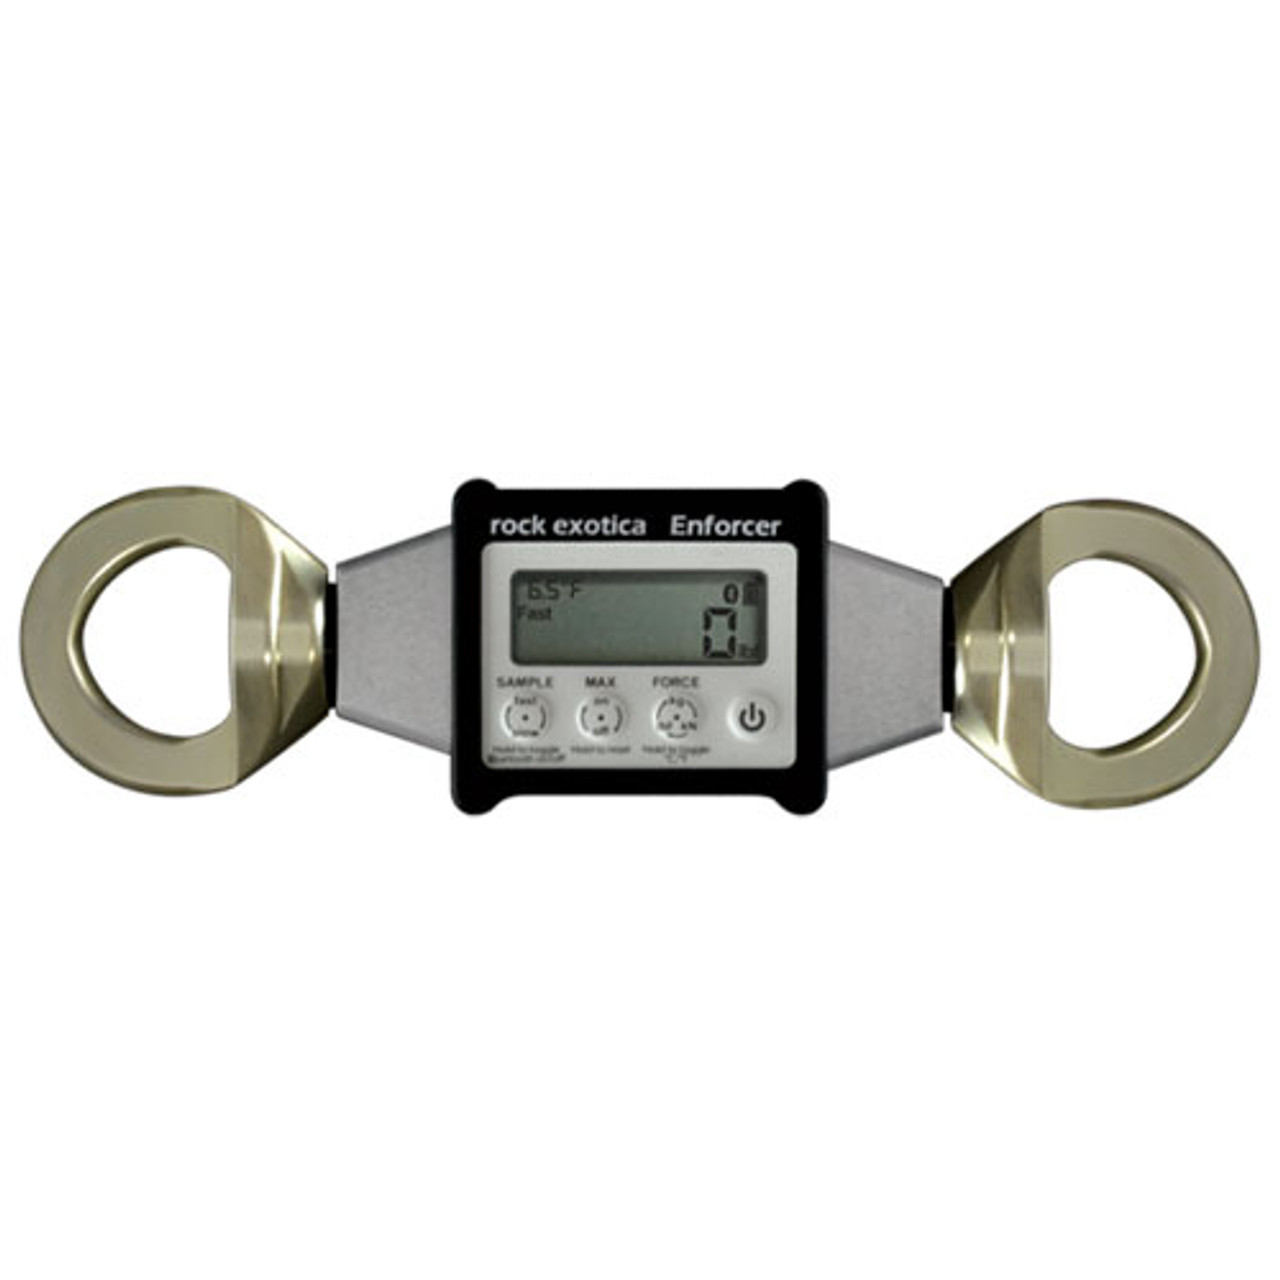 Rock Exotica enForcer Load Cell w/ Case - 20 kN Capacity - #LC1